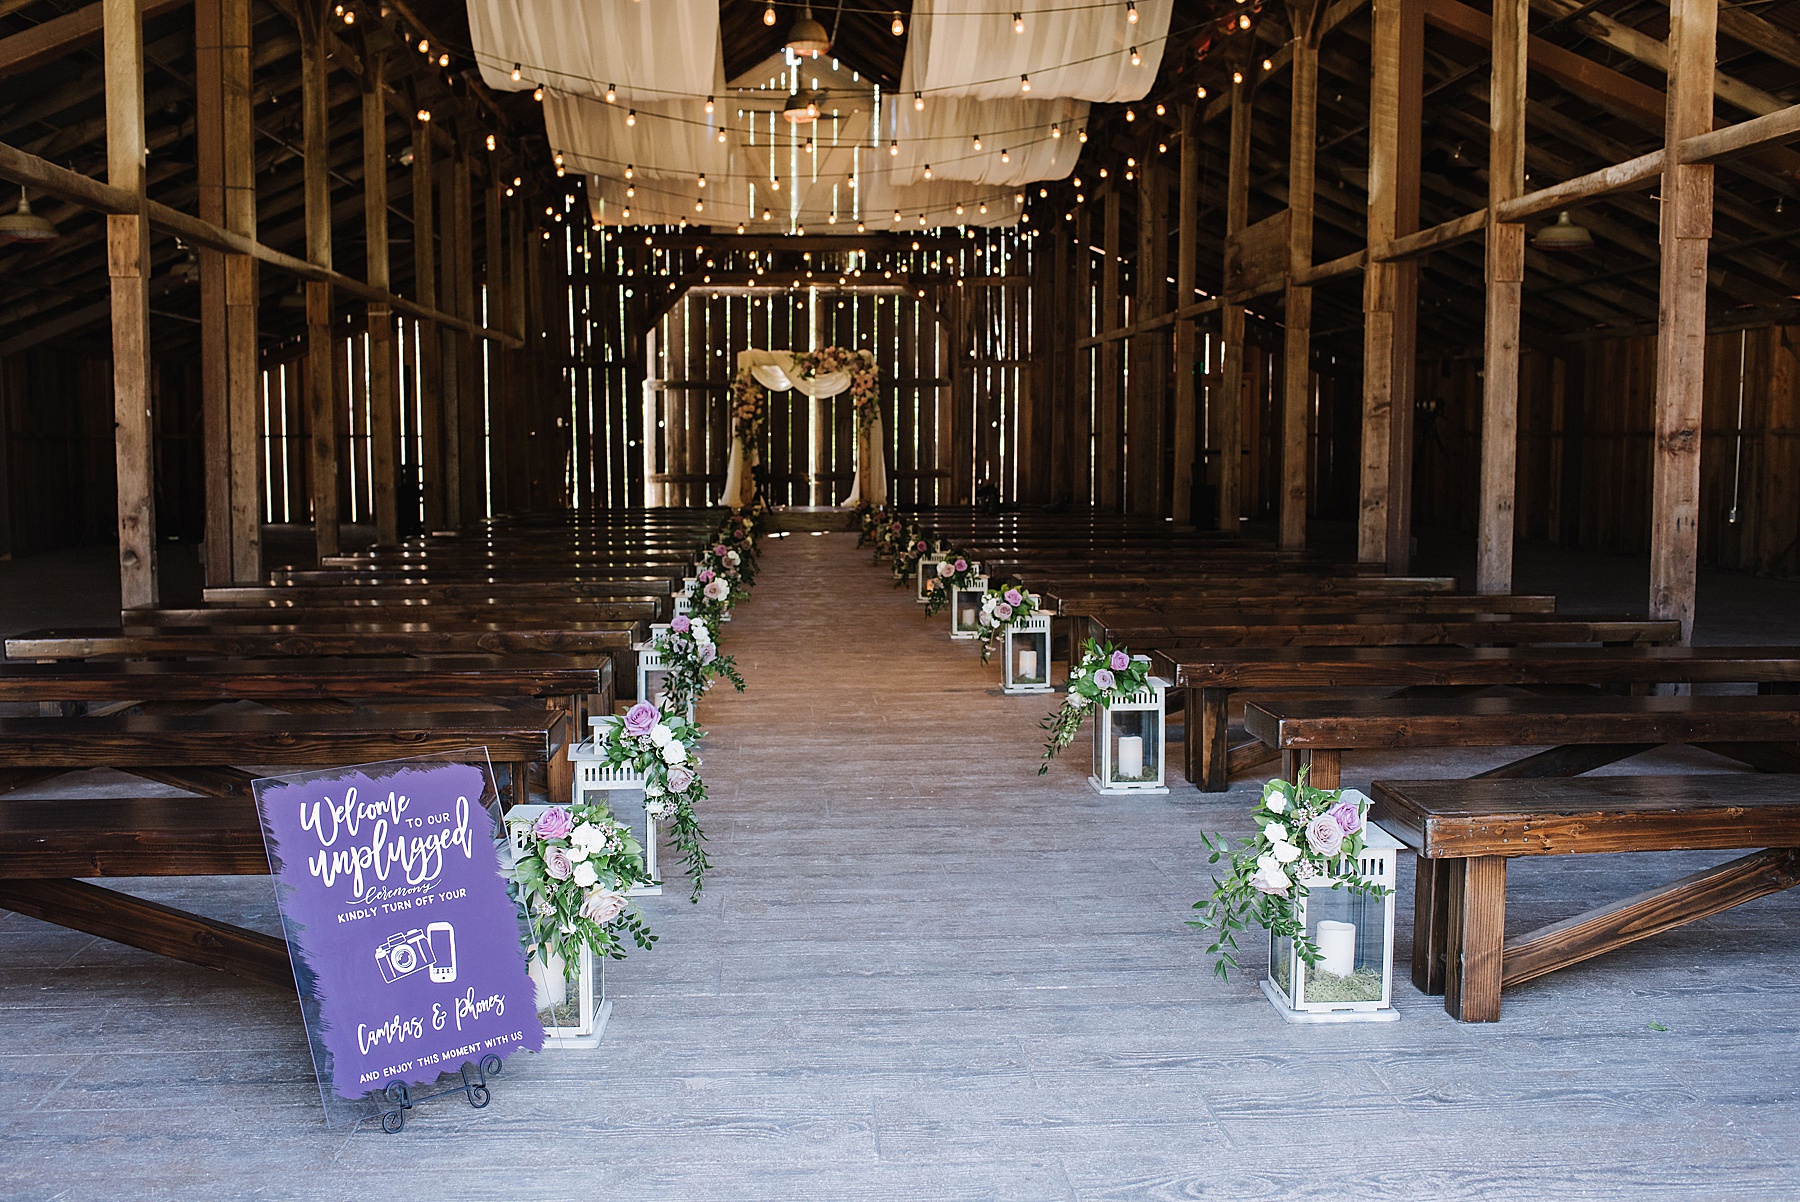 Rustic wedding venue. String lights are lining the ceiling. White lanterns with pink floral accents line the aisle.